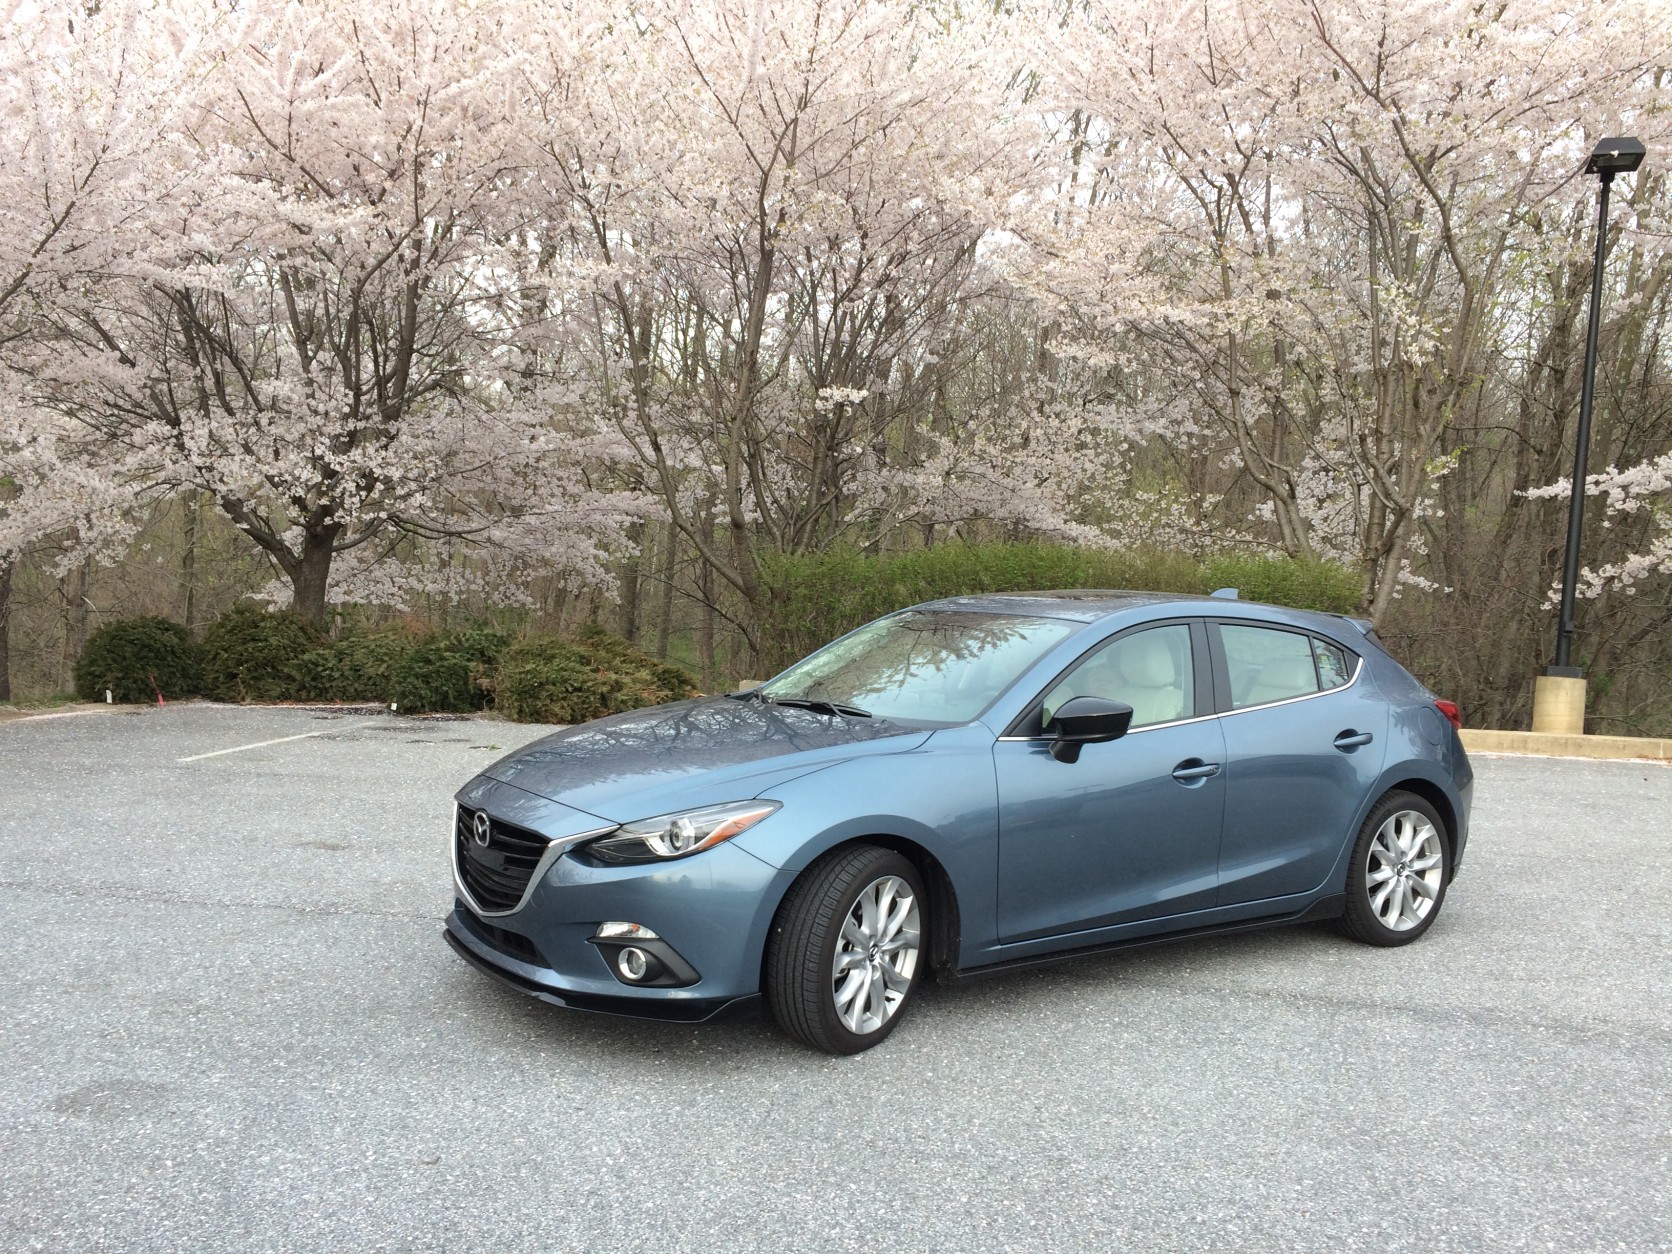 The Mazda3 S Grand Touring with its peppy 4-cylinder engine and good gas mileage makes a fun, sporty 5-door compact. (WTOP/Mike Parris)